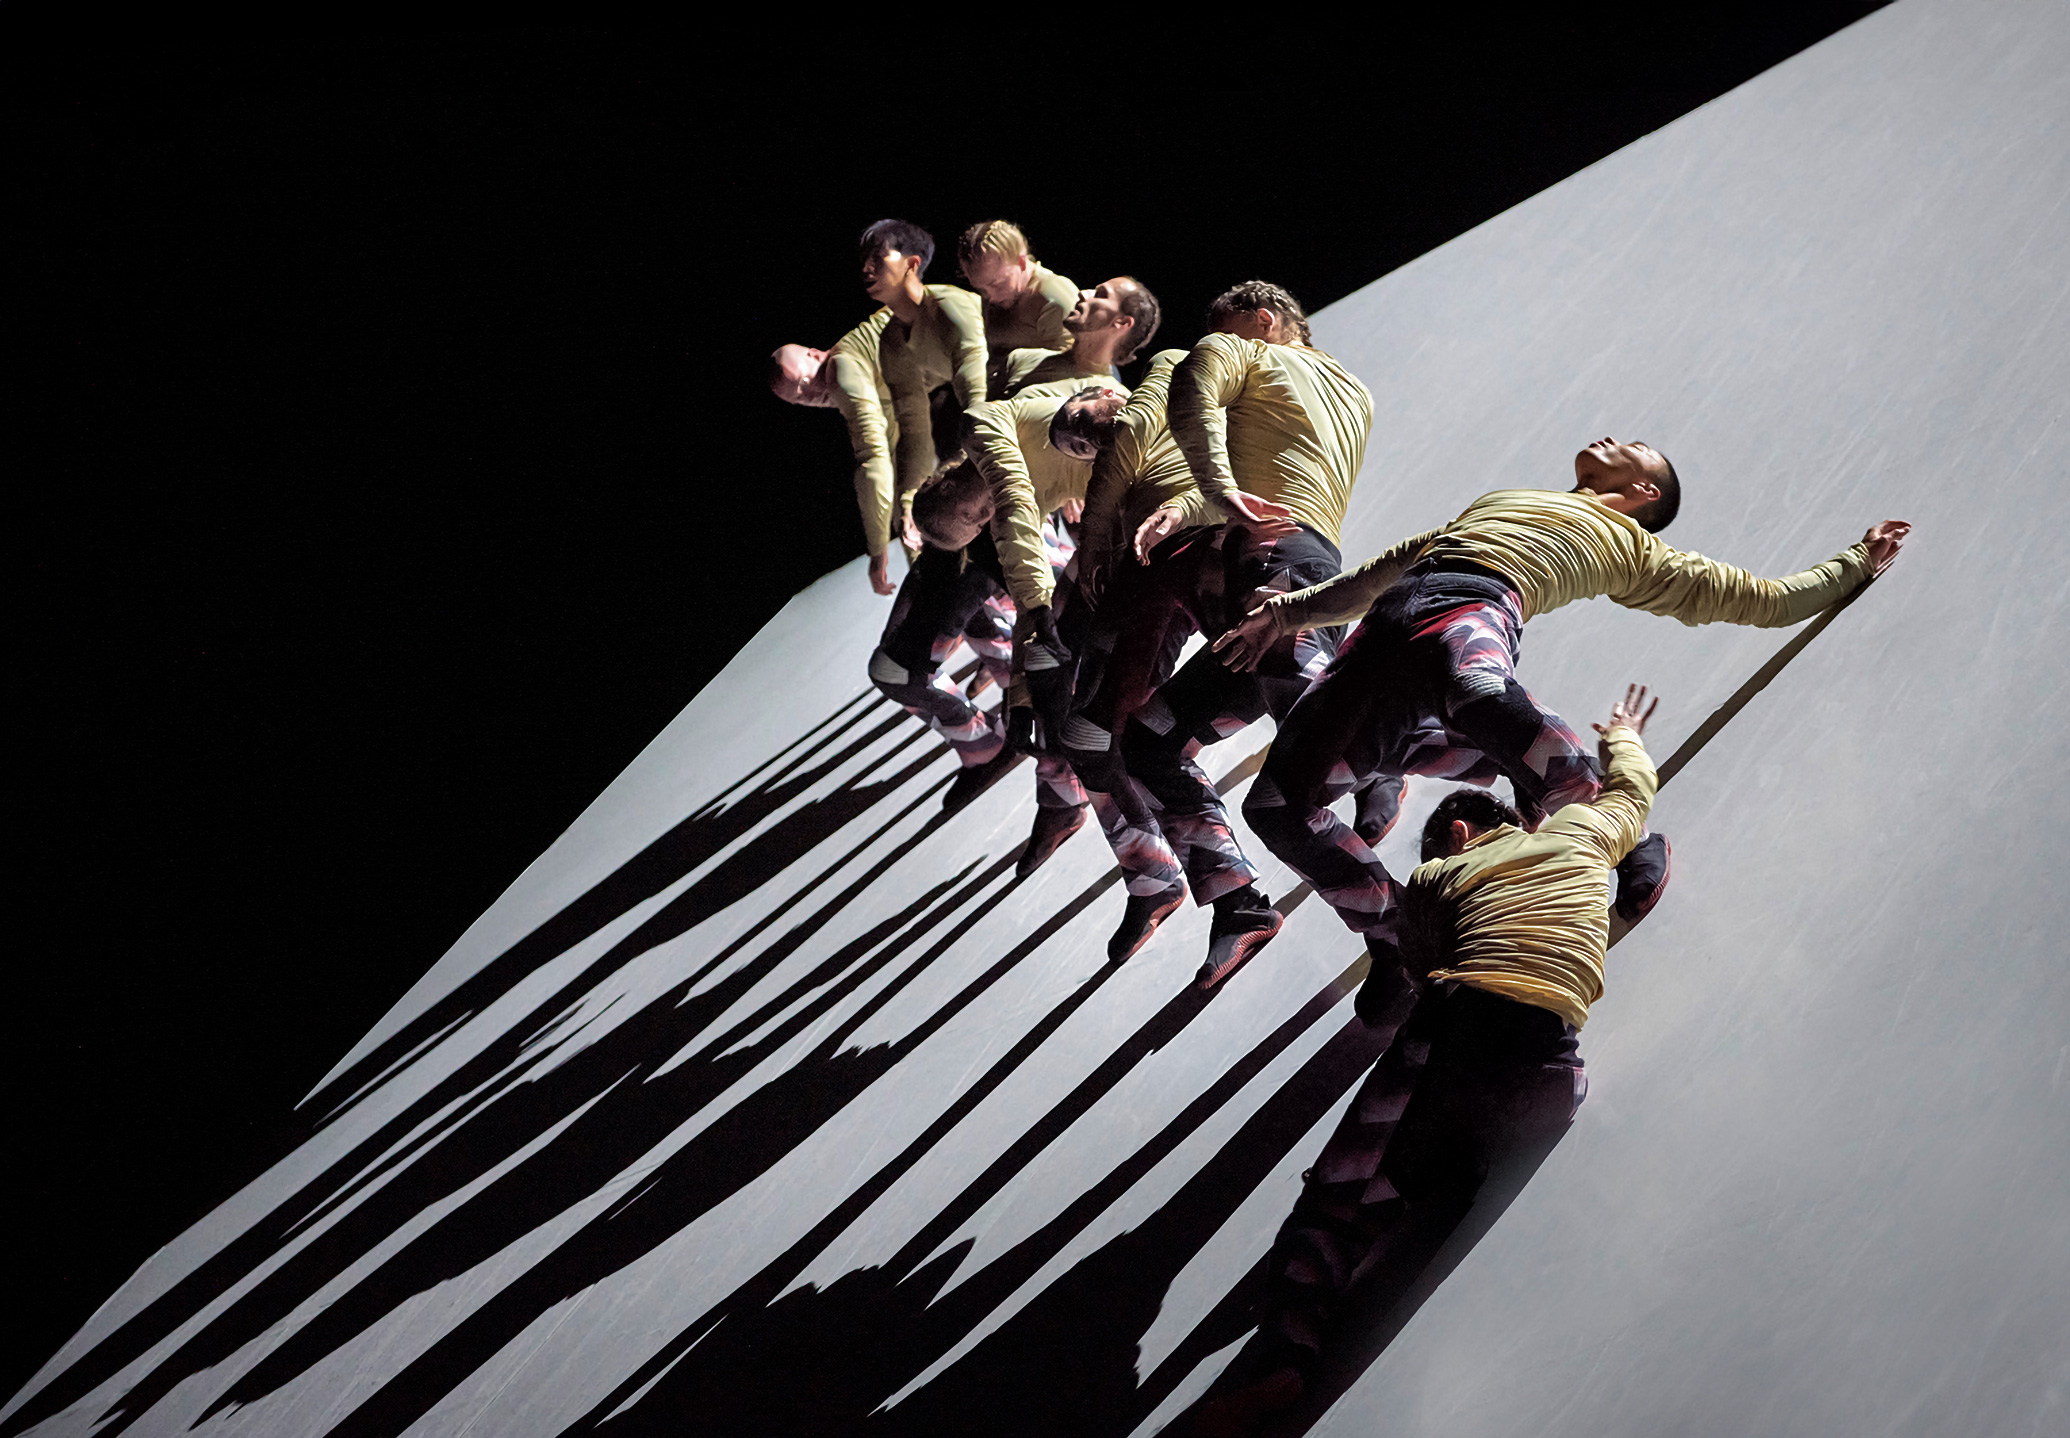 A group of dancers in yellow shirts and dark pants leaning against a sloping surface. They are positioned in various stances, creating an artistic and dynamic visual effect. Their elongated shadows are prominently emerging on the surface, adding a dramatic touch to the composition. The background is dark, which highlights the subjects and their shadows. The lighting is focused on the individuals, emphasizing their clothes and creating distinct shadows.